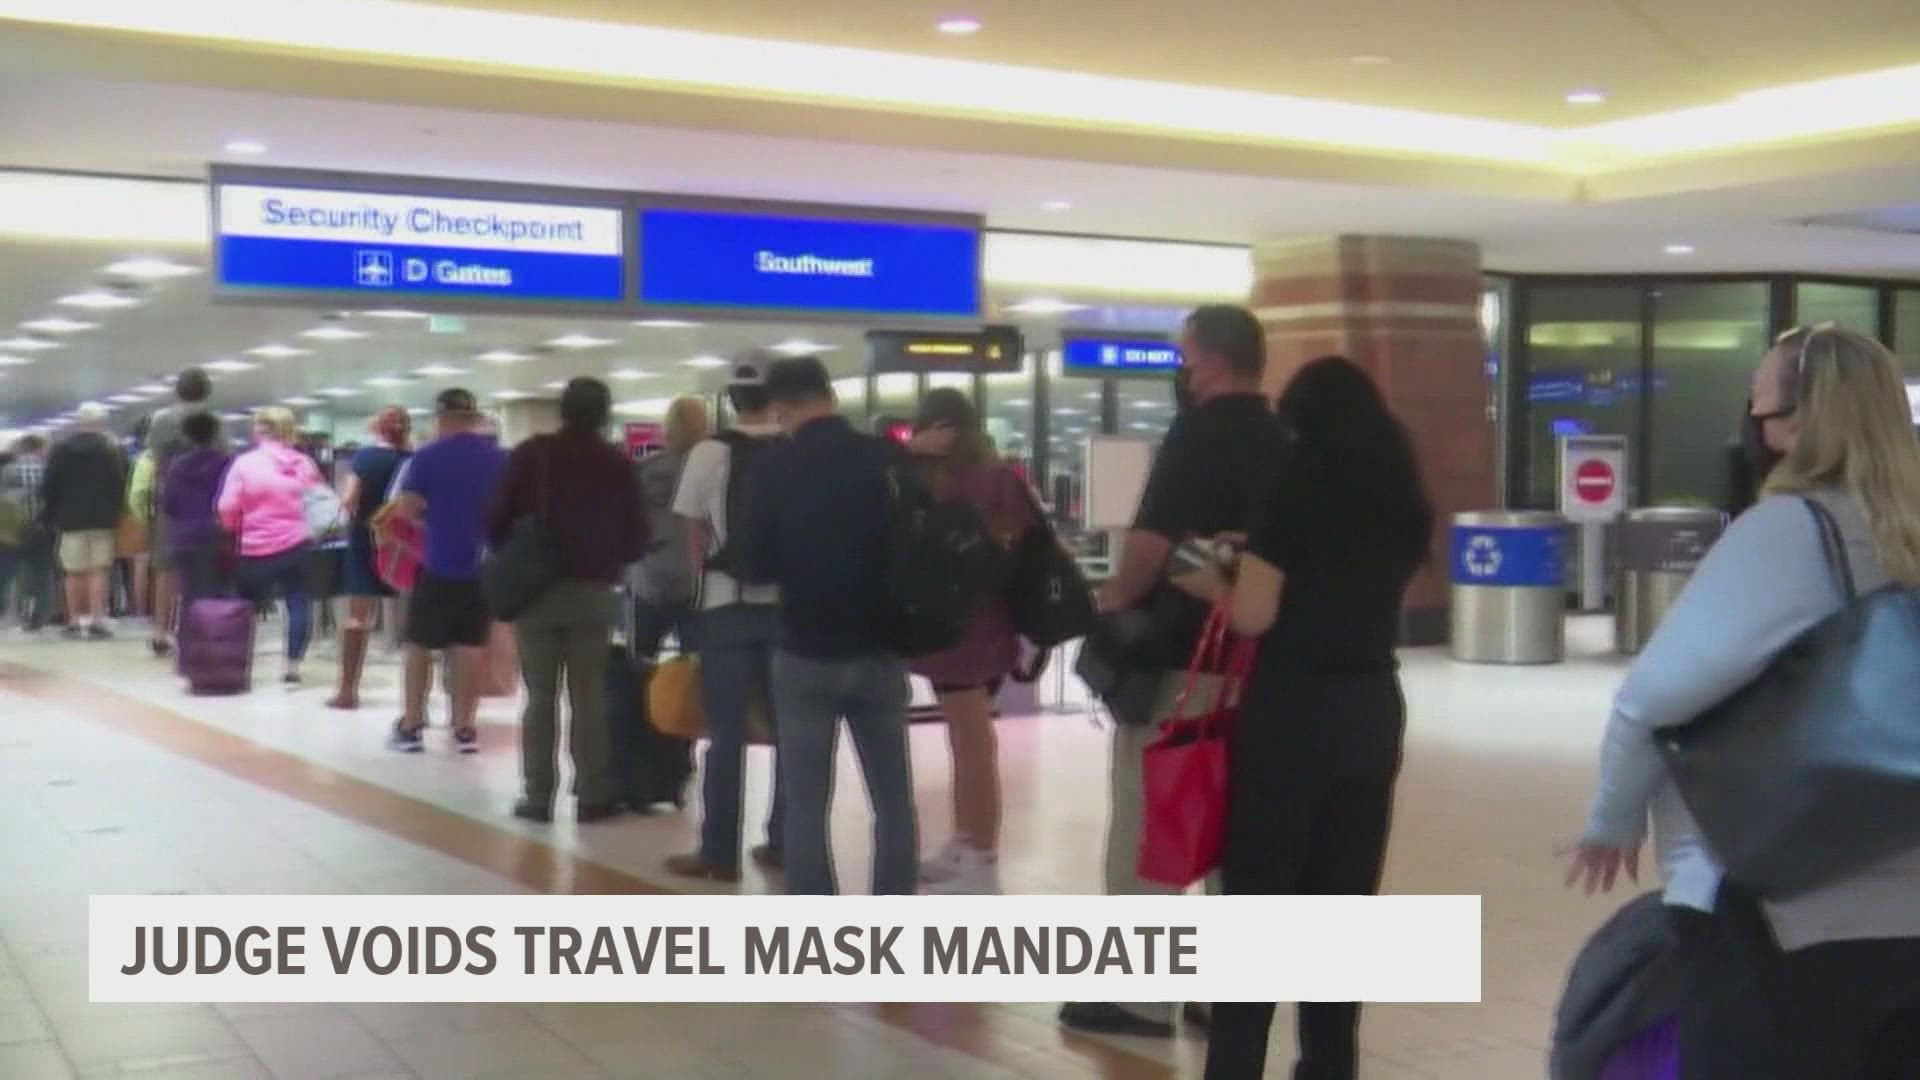 The TSA won't enforce the mask rule until further notice, according to CBS.